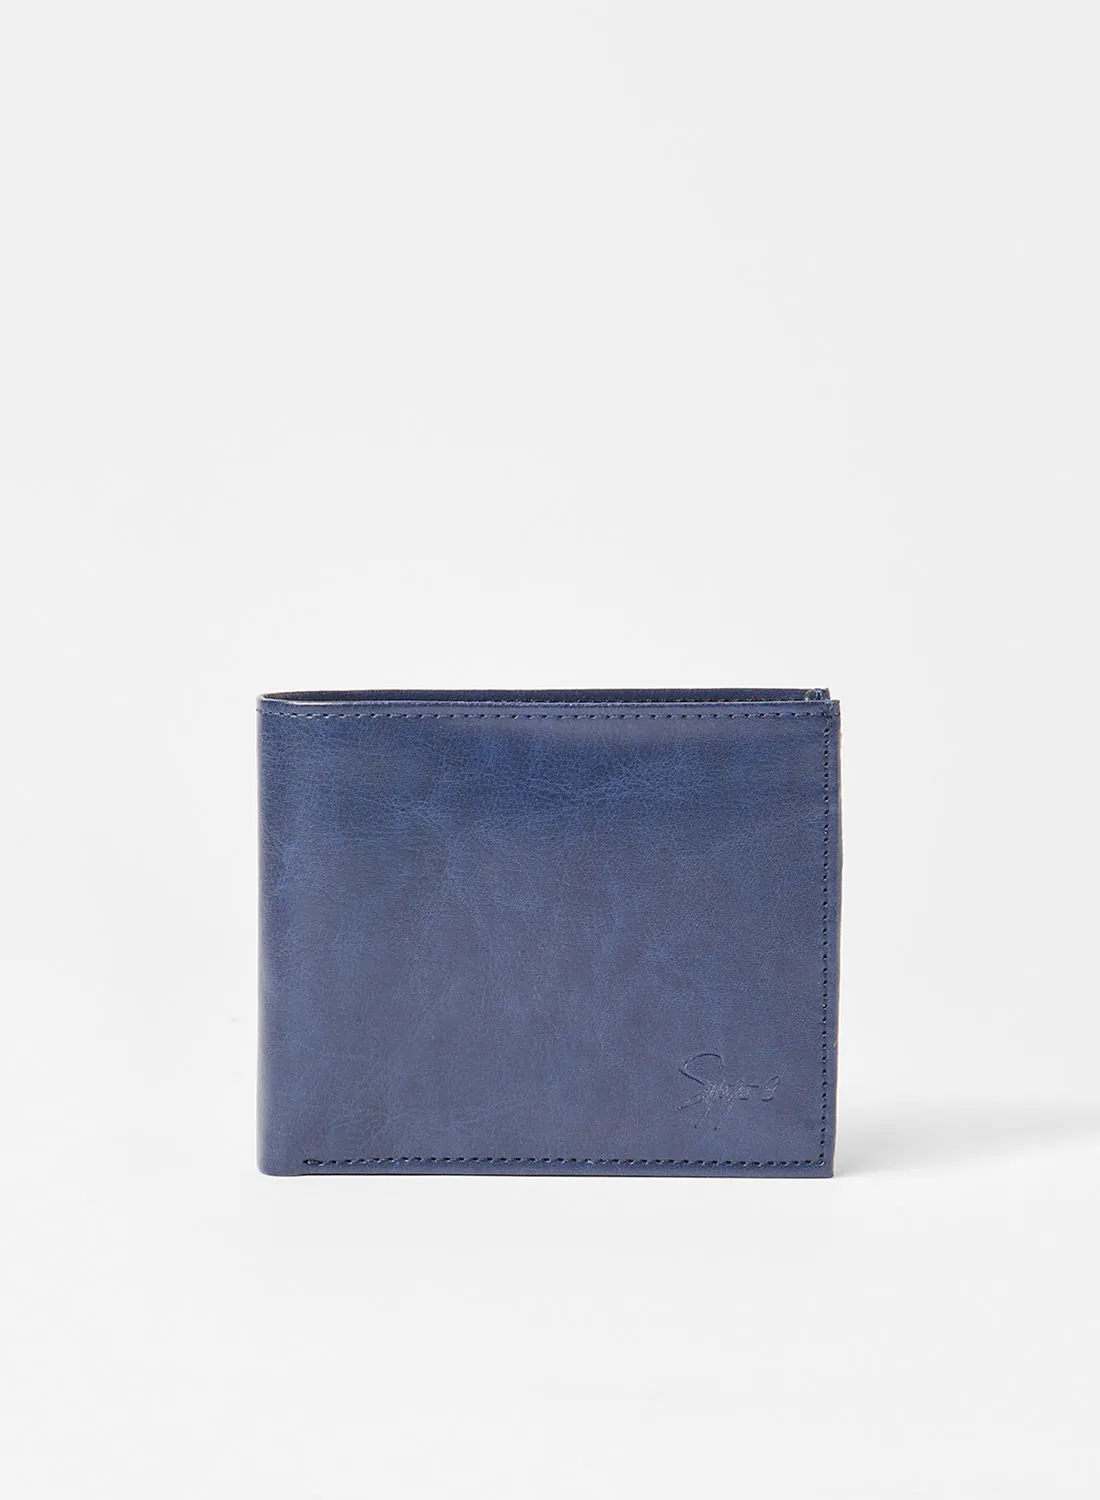 STATE 8 Two Tone Leather Wallet Blue/Orange